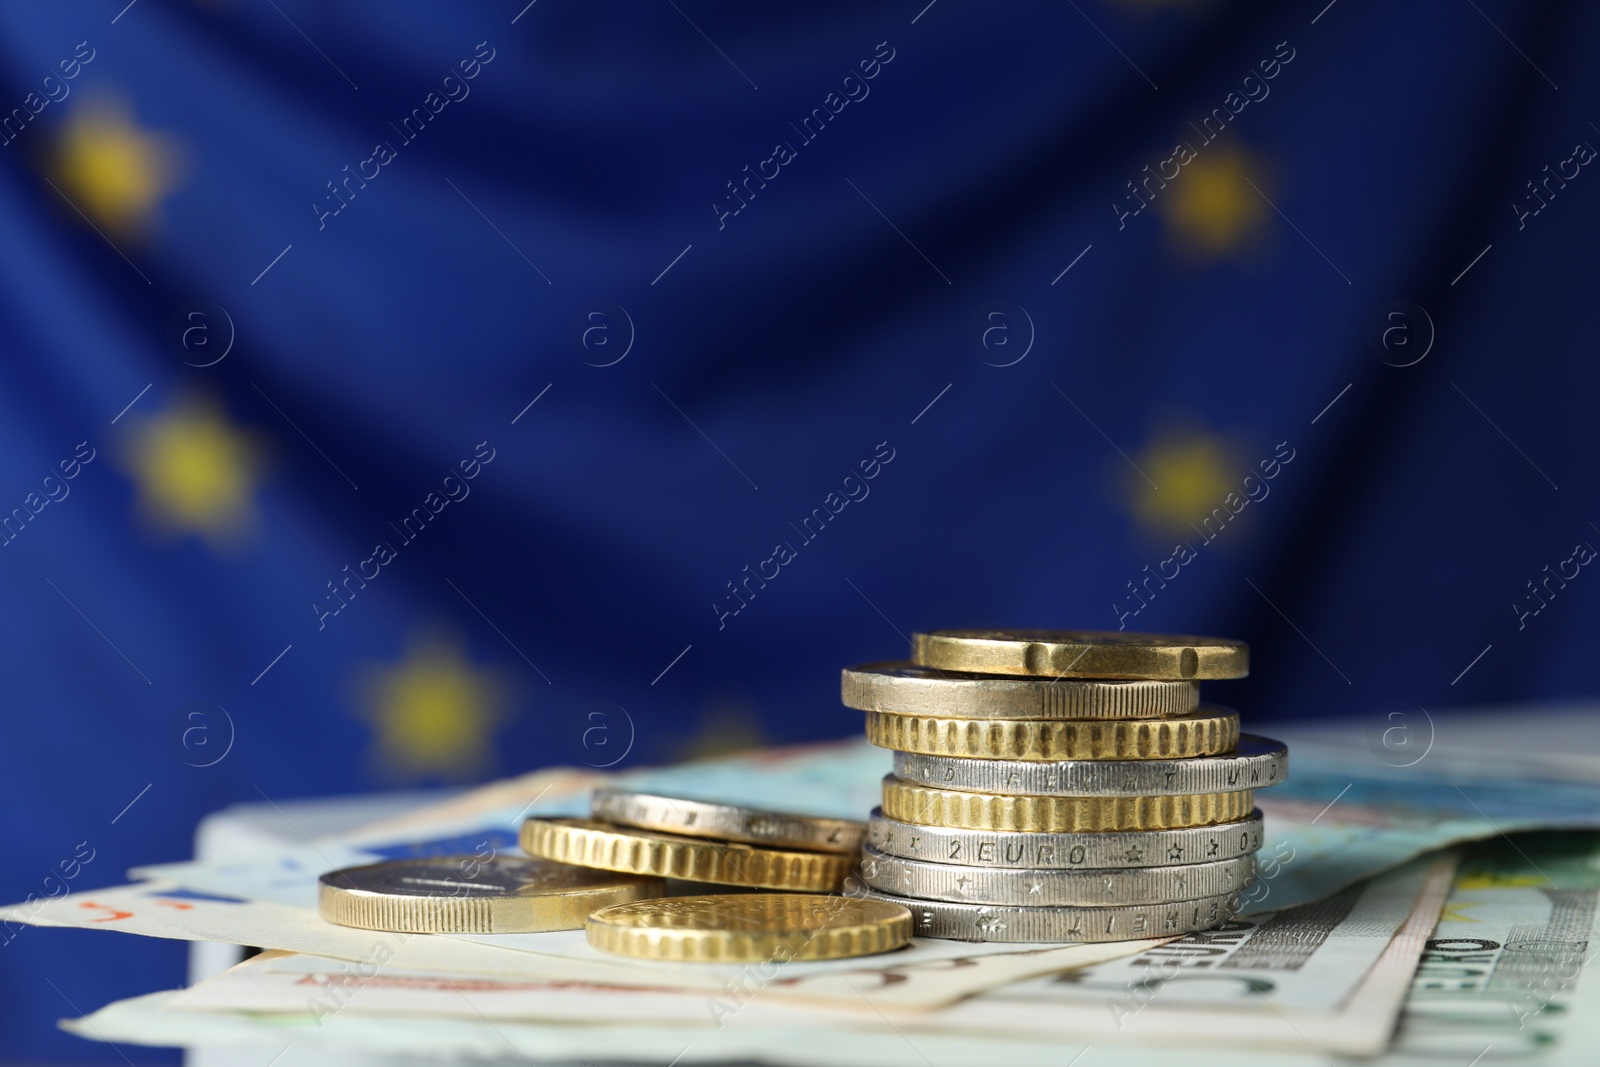 Photo of Coins and banknotes on table against European Union flag, space for text